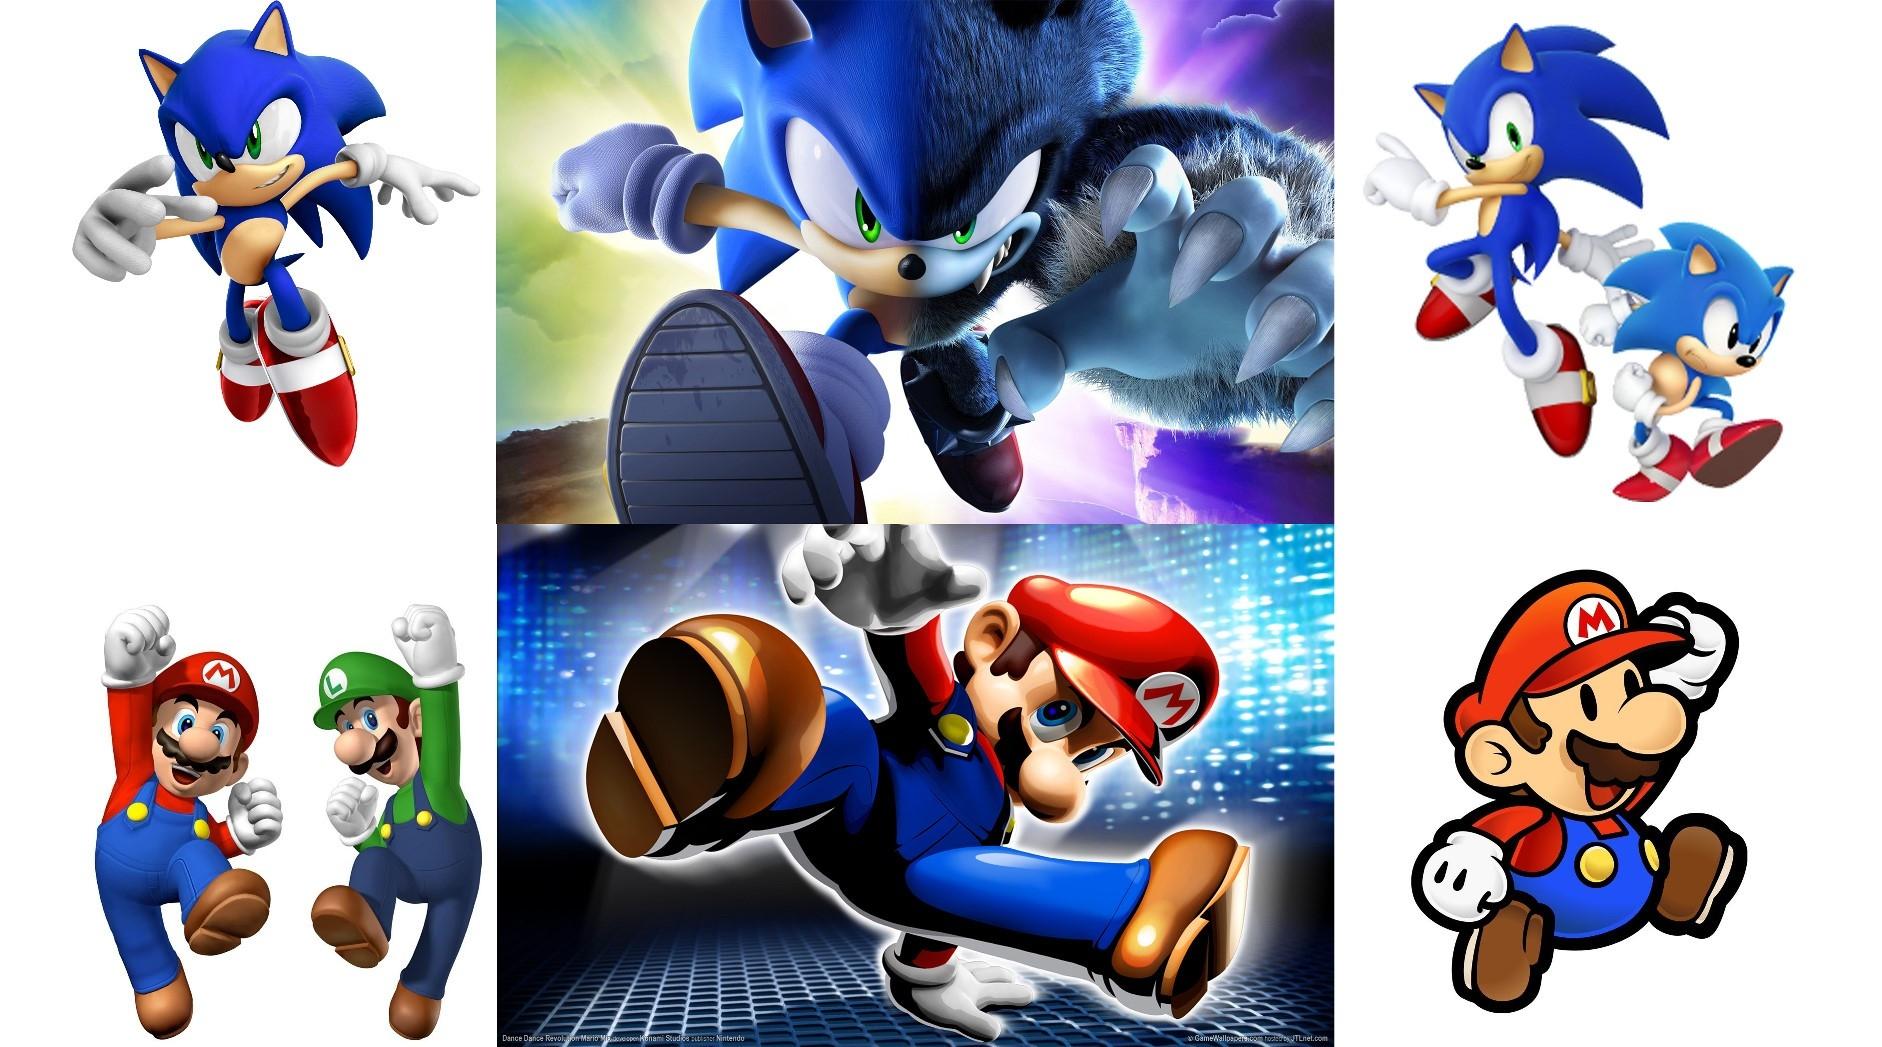 Mario And Sonic Wallpaper